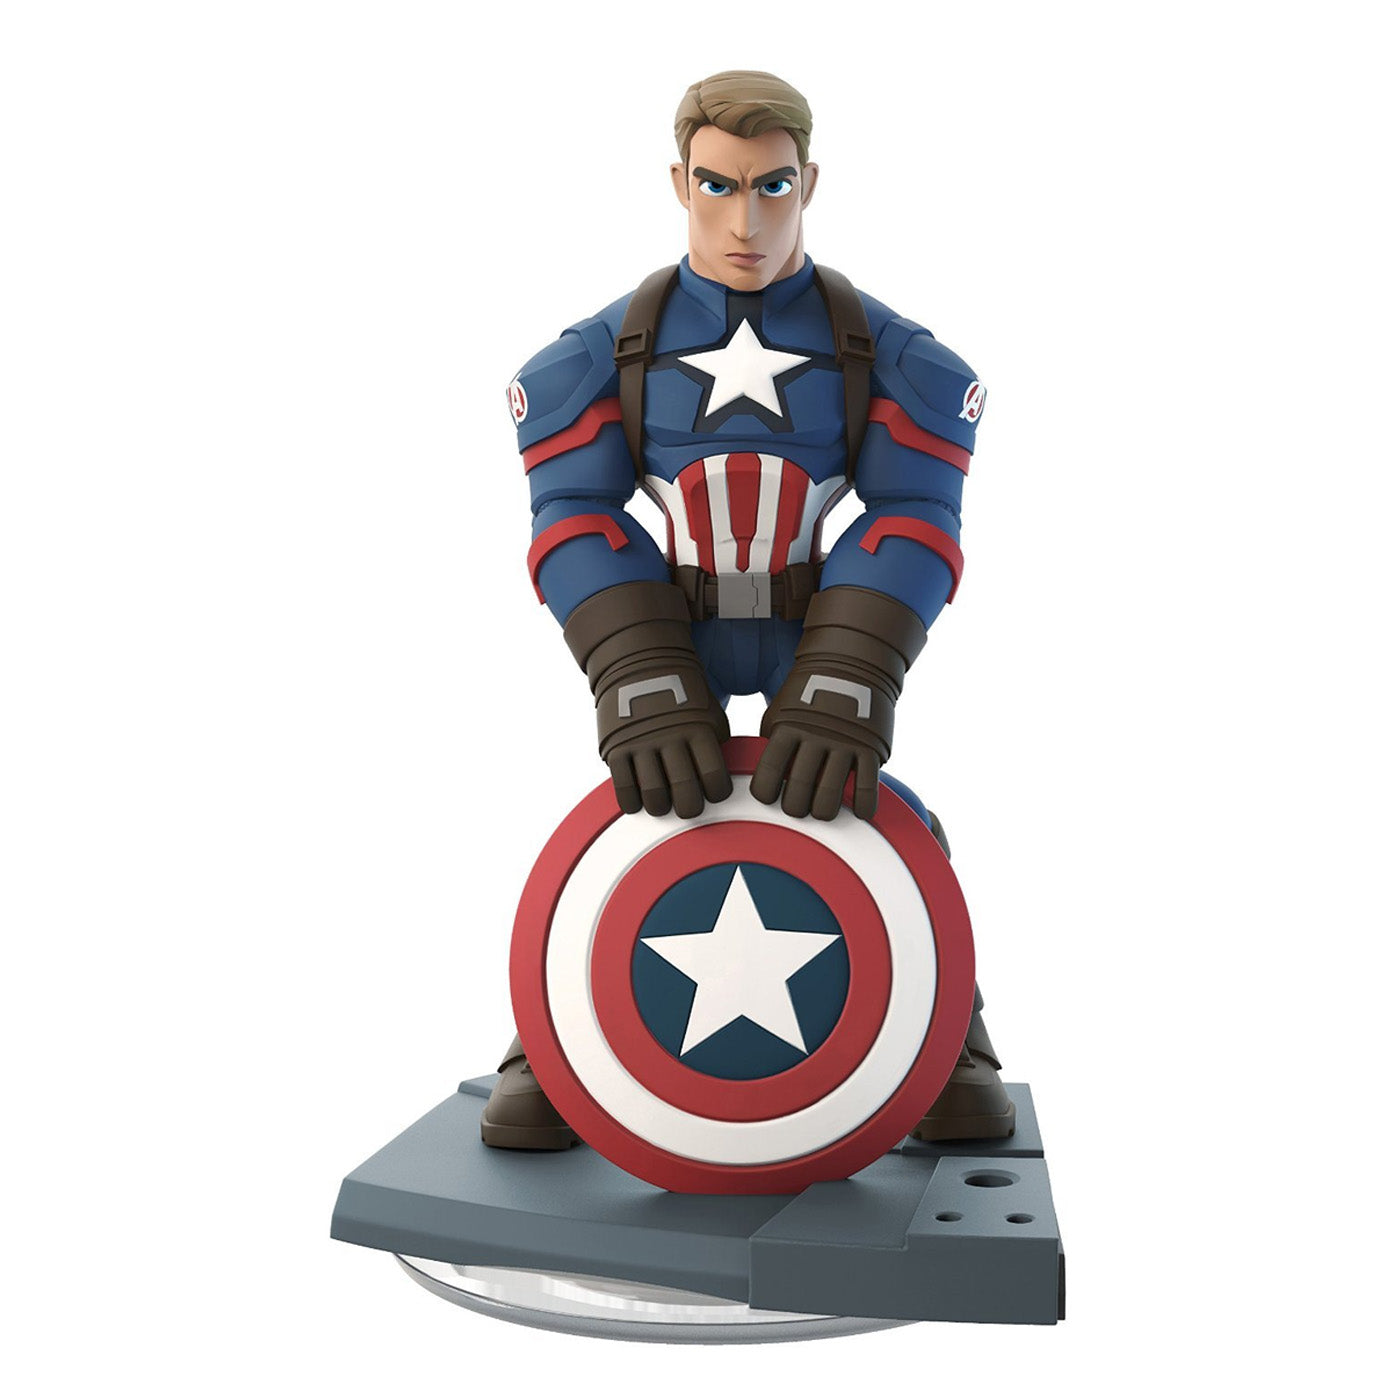 Disney Infinity 3.0 Character: Captain America - The First Avenger